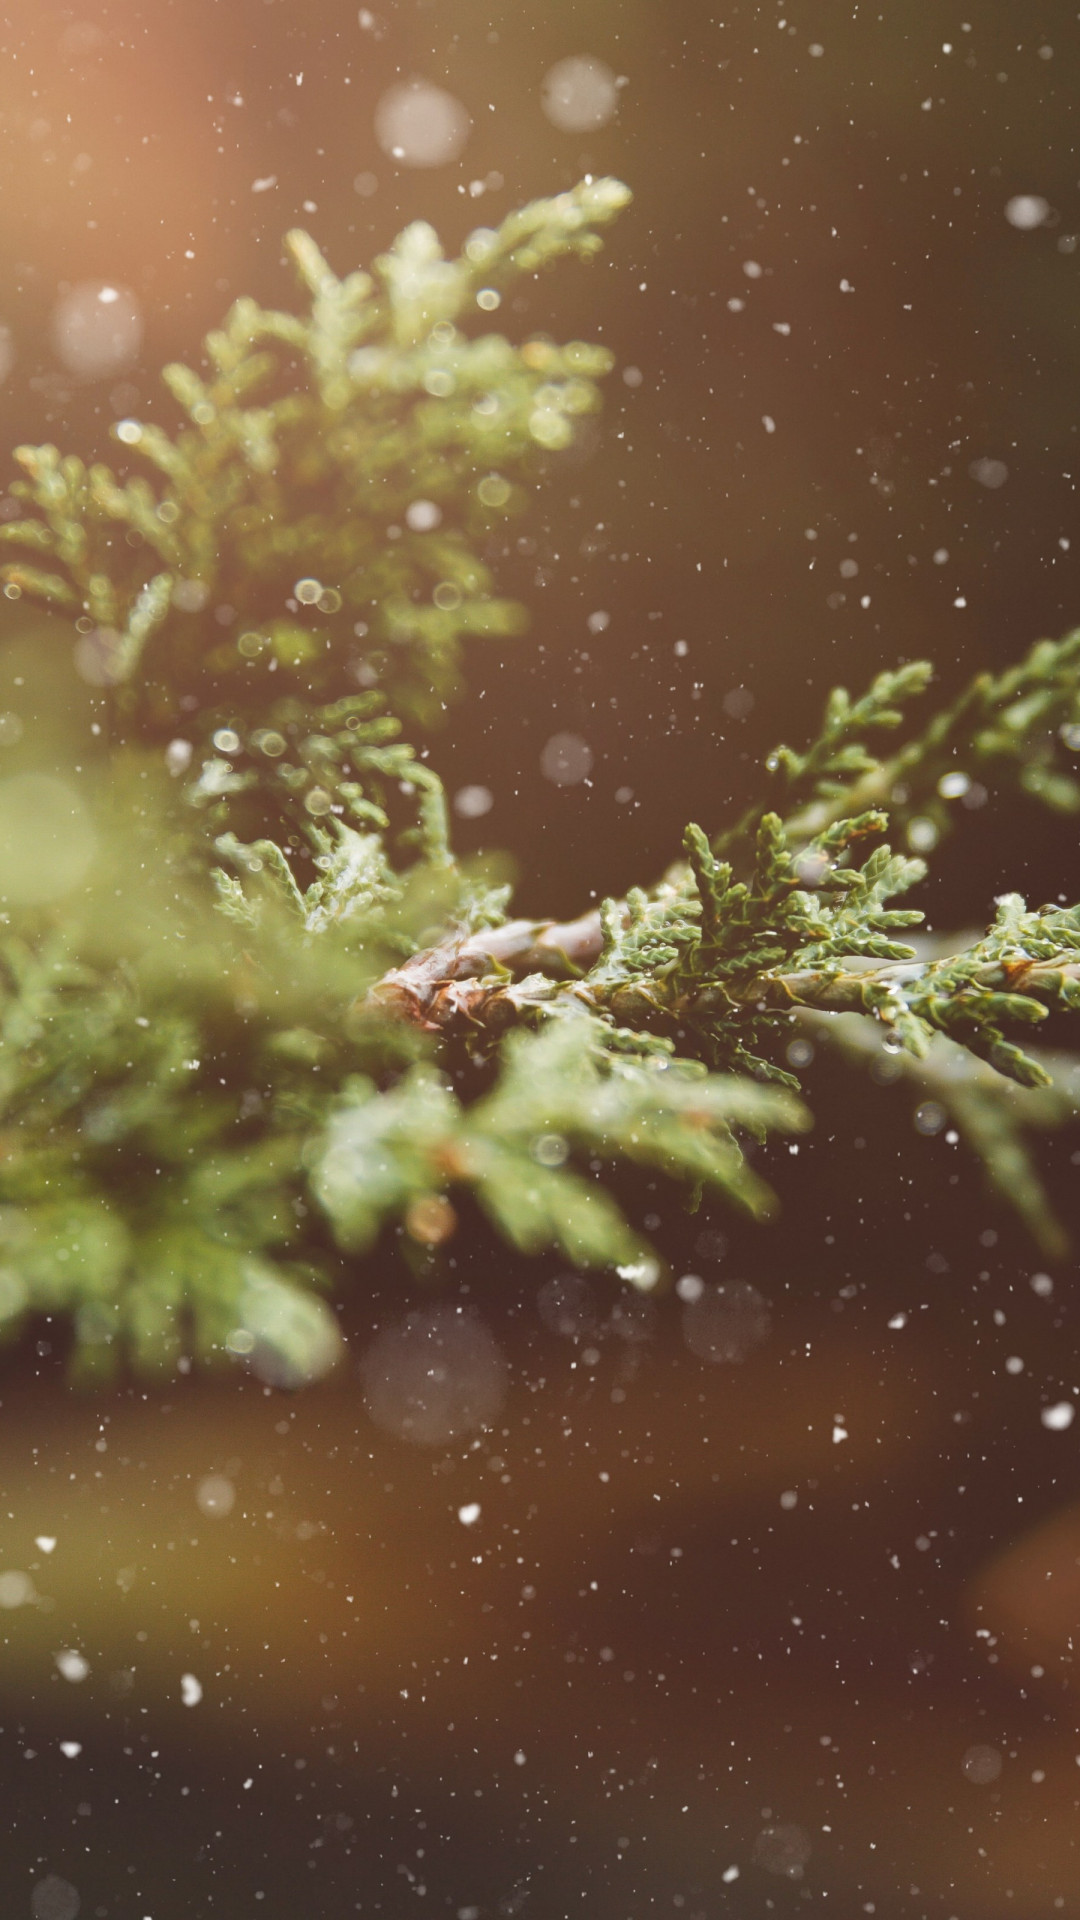 Snowflakes over the pine branch wallpaper 1080x1920